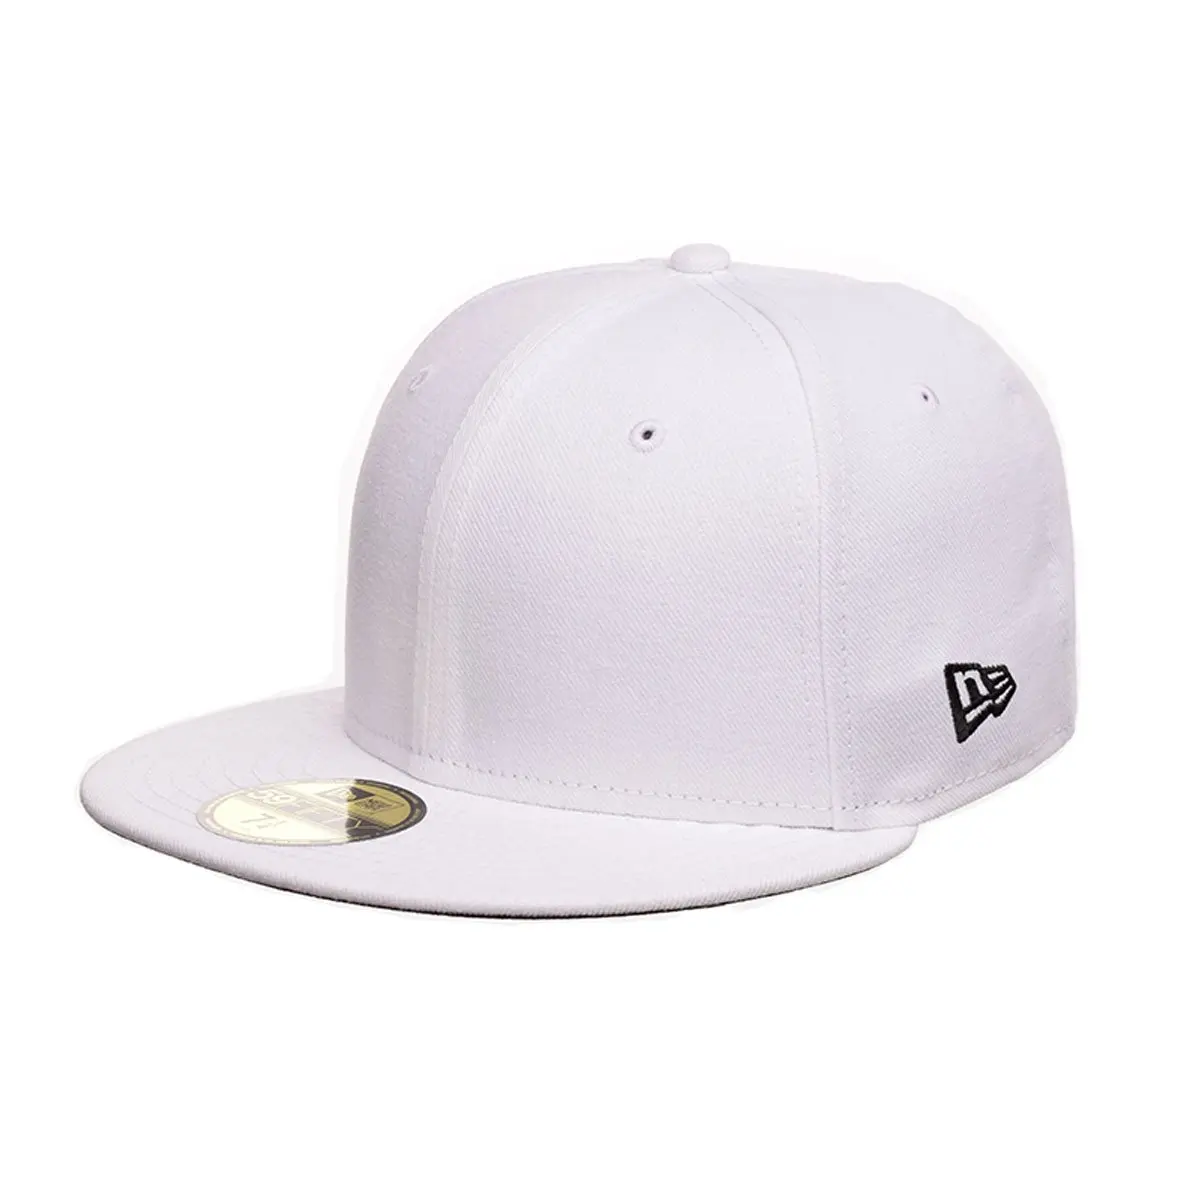 New Era 59FIFTY-BLANK Solid White Fitted Hat | stickhealthcare.co.uk